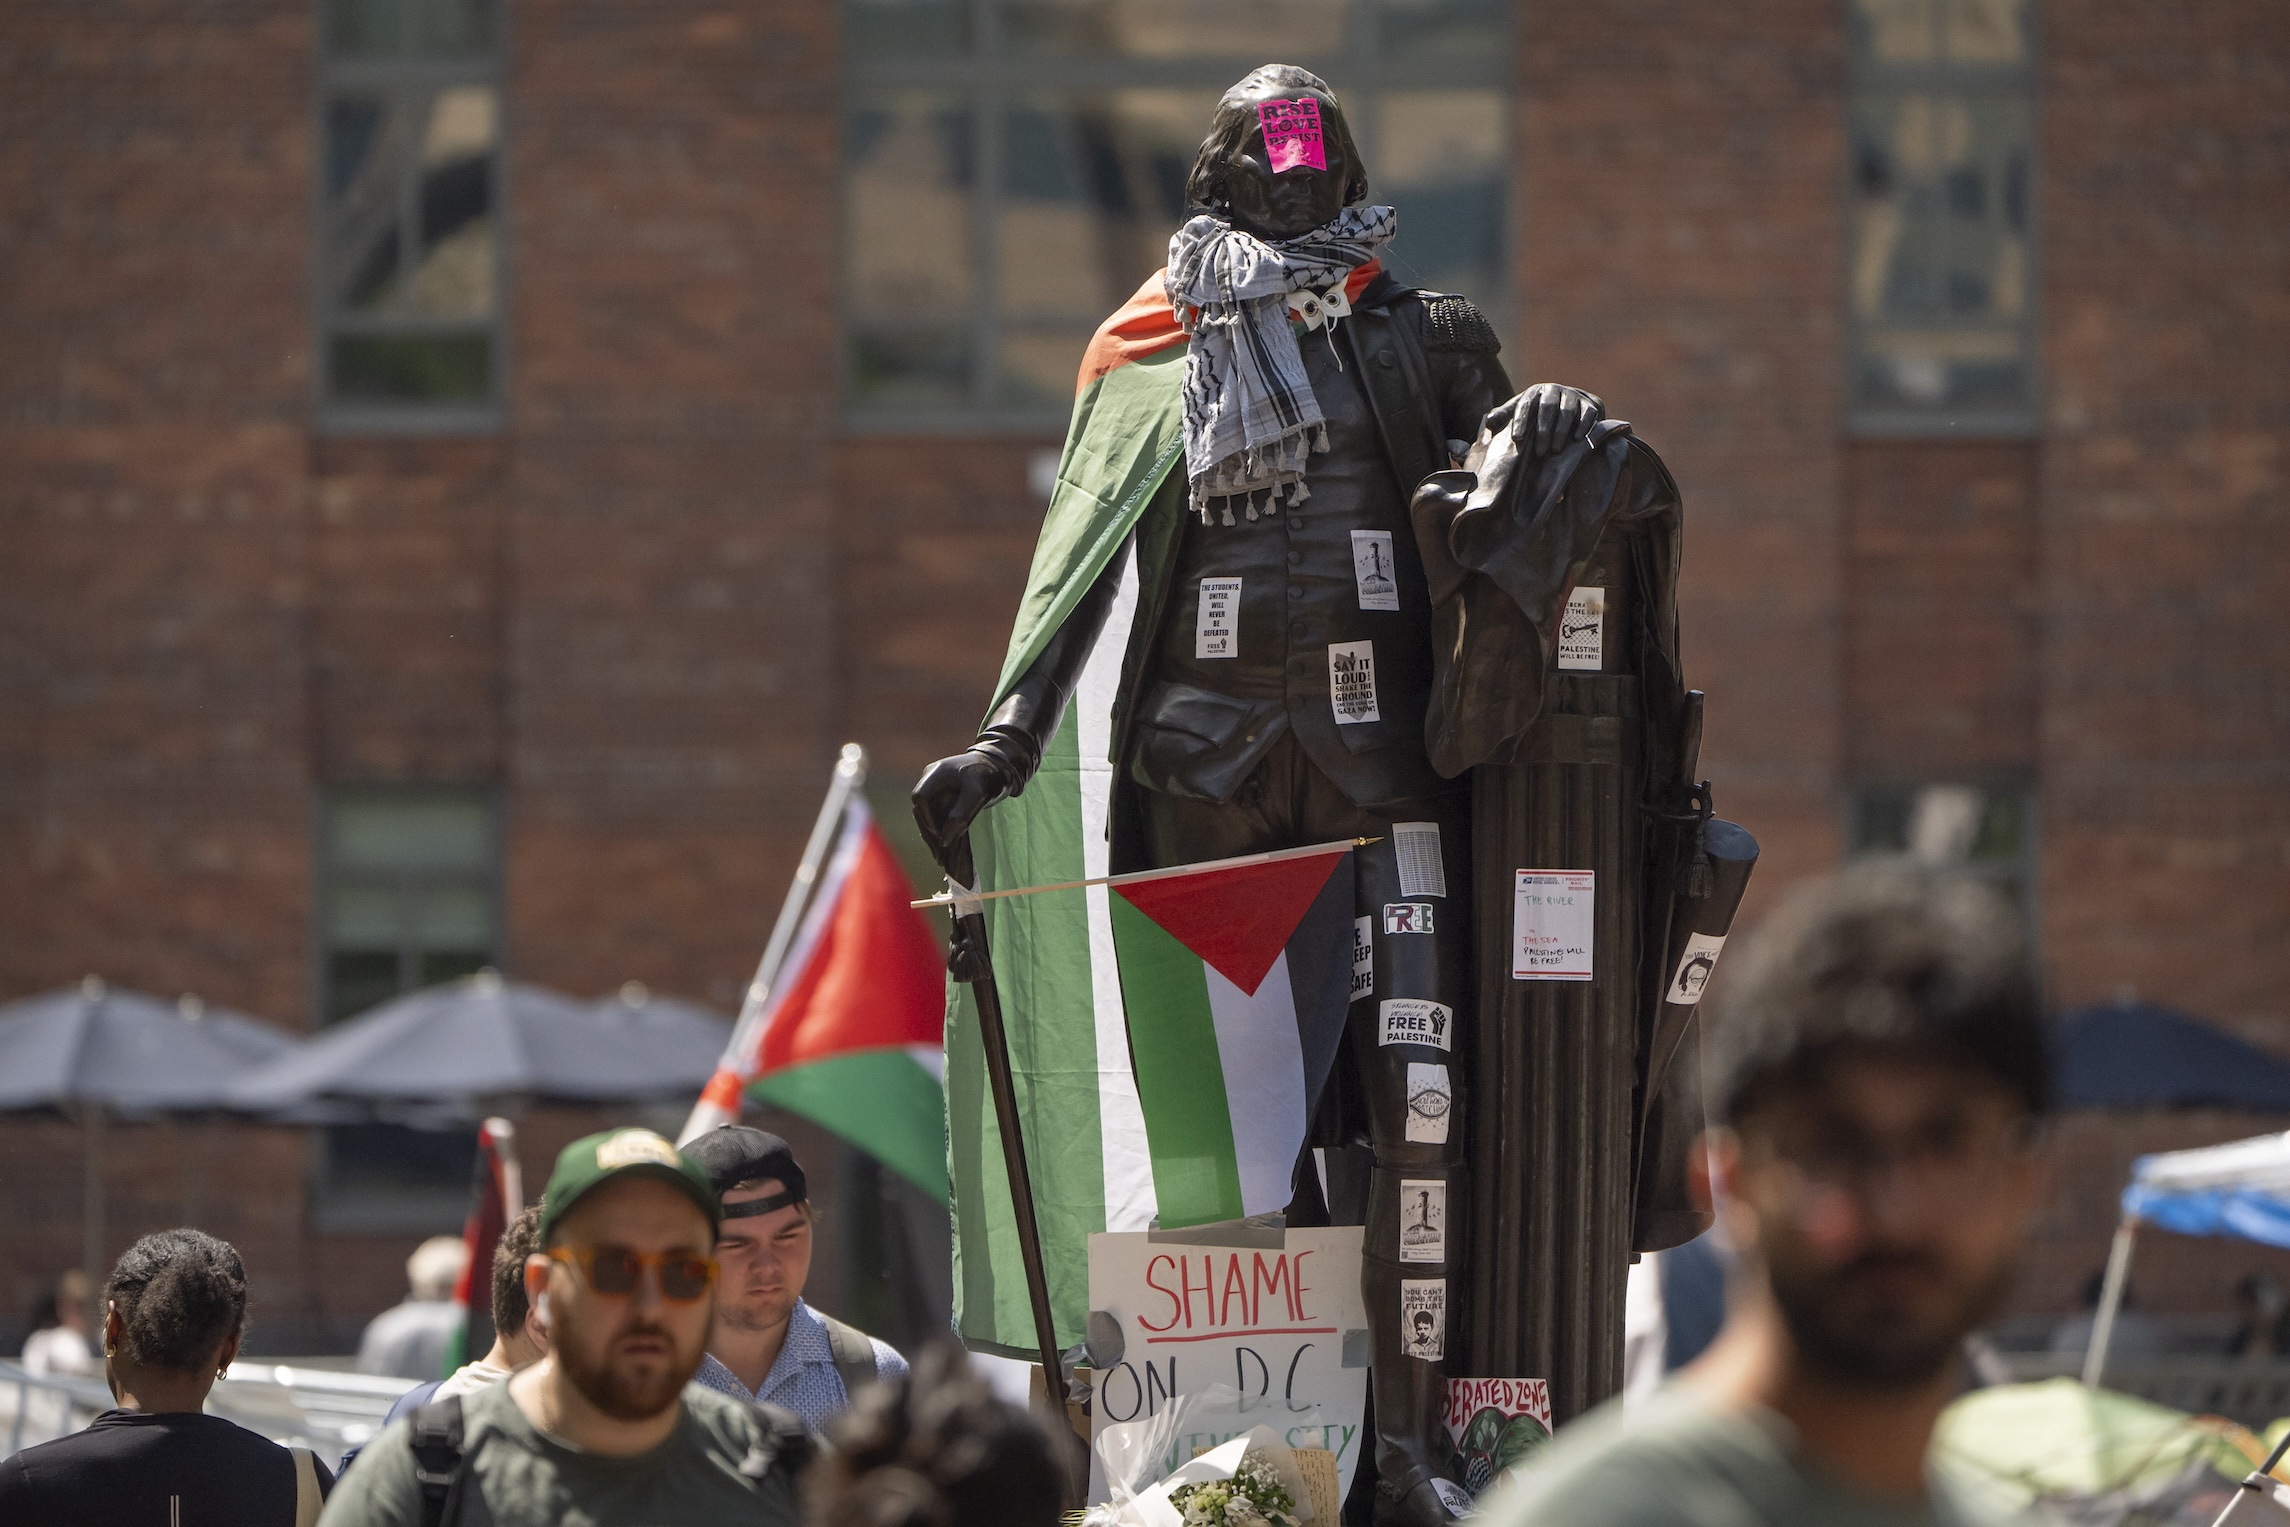 Resistance movement: Five ways universities are trying to shut down anti-Israel protesters taking over campuses [Video]